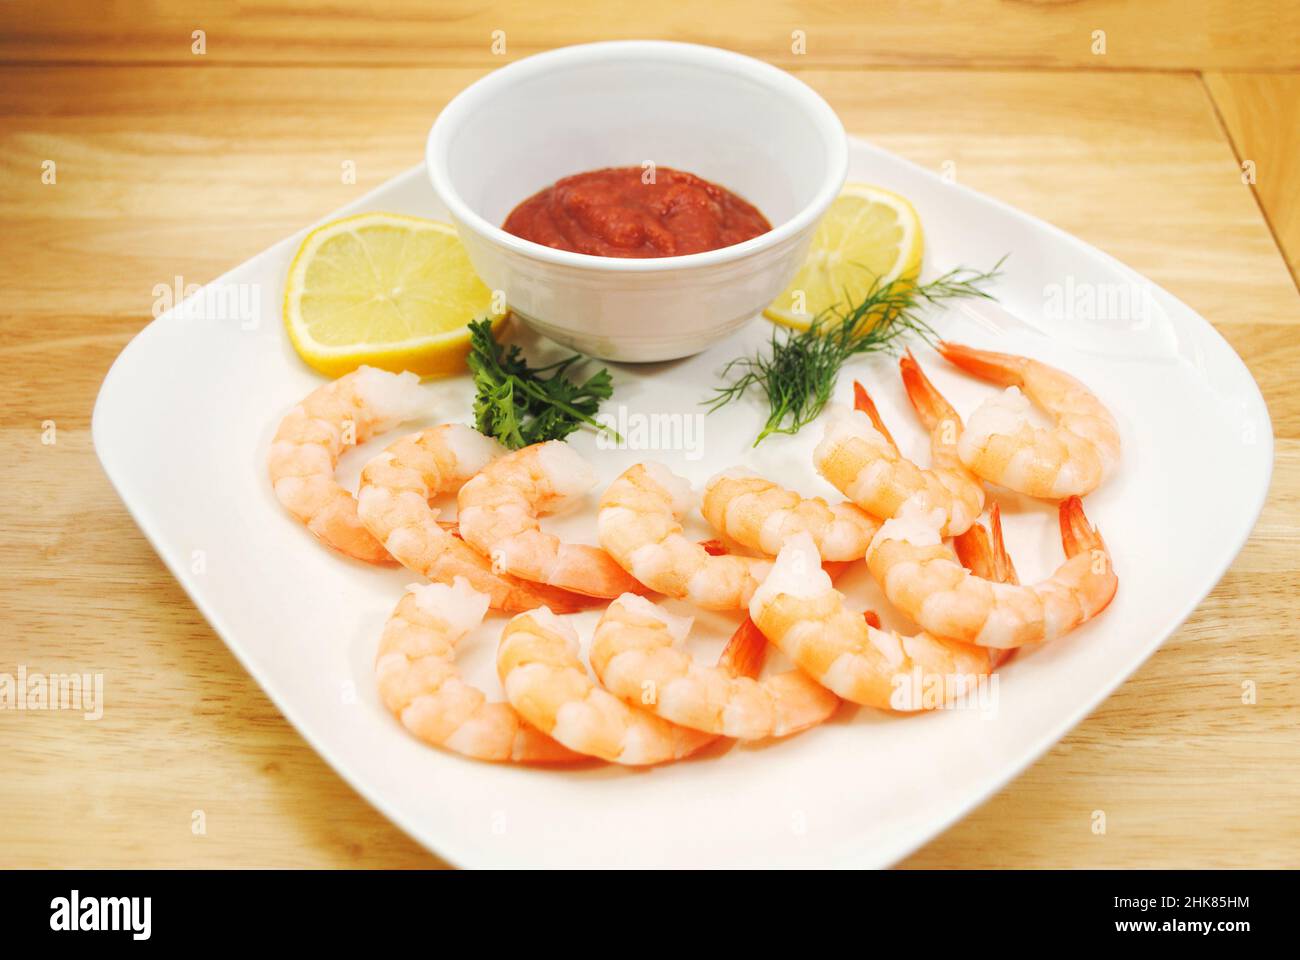 Appetizer of Fresh Cooked Shrimp with Sliced Lemon, cocktail Sauce, Dill, and Parsley Stock Photo